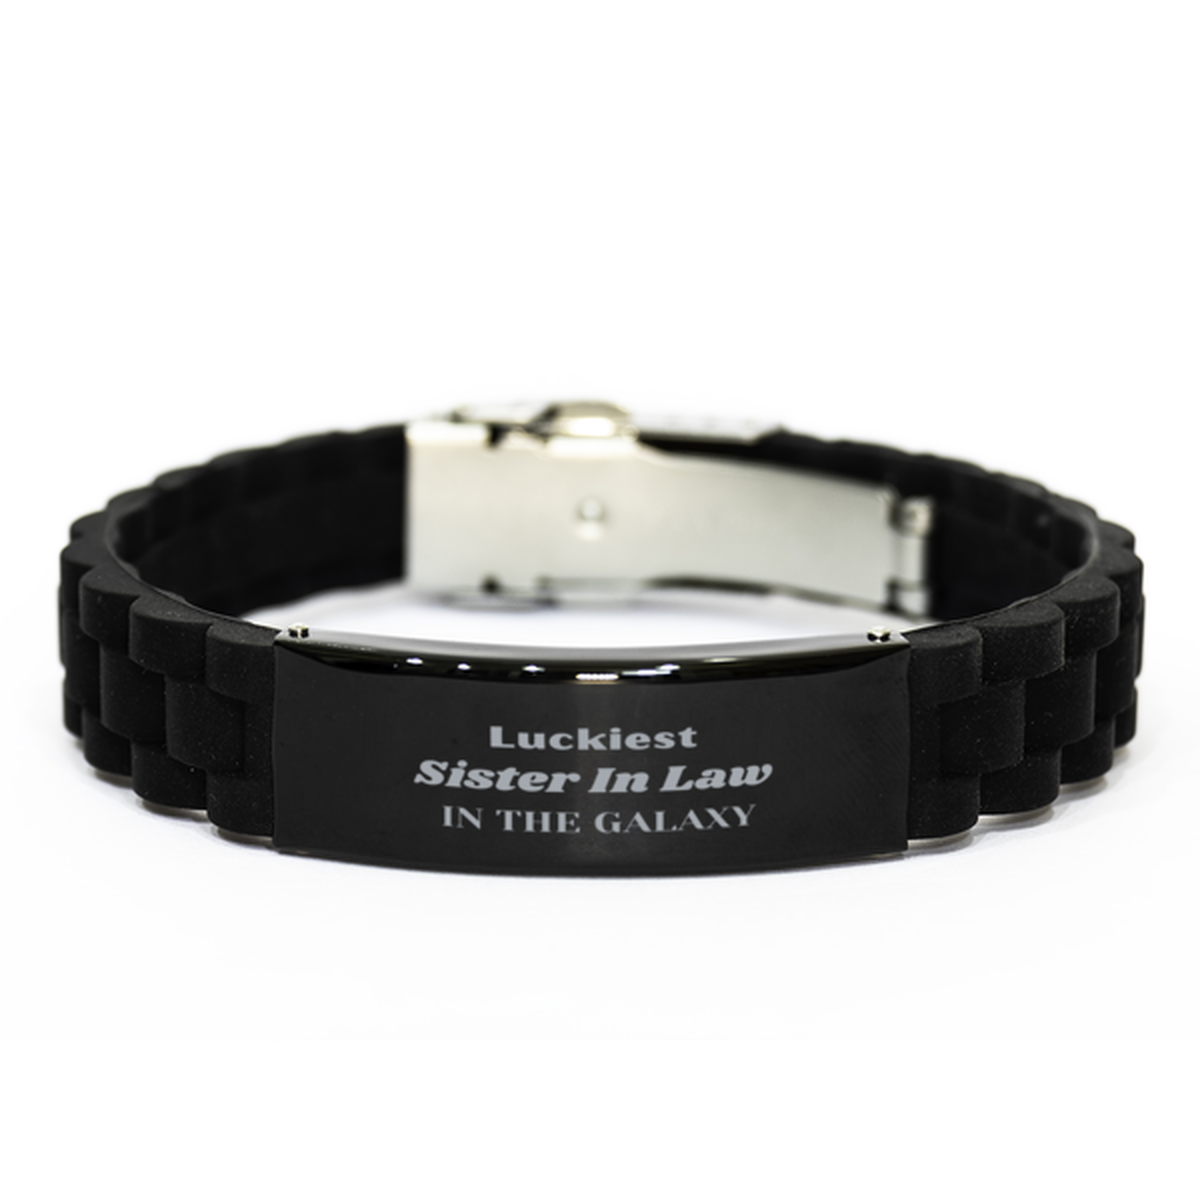 Luckiest Sister In Law in the Galaxy, To My Sister In Law Engraved Gifts, Christmas Sister In Law Black Glidelock Clasp Bracelet Gifts, X-mas Birthday Unique Gifts For Sister In Law Men Women